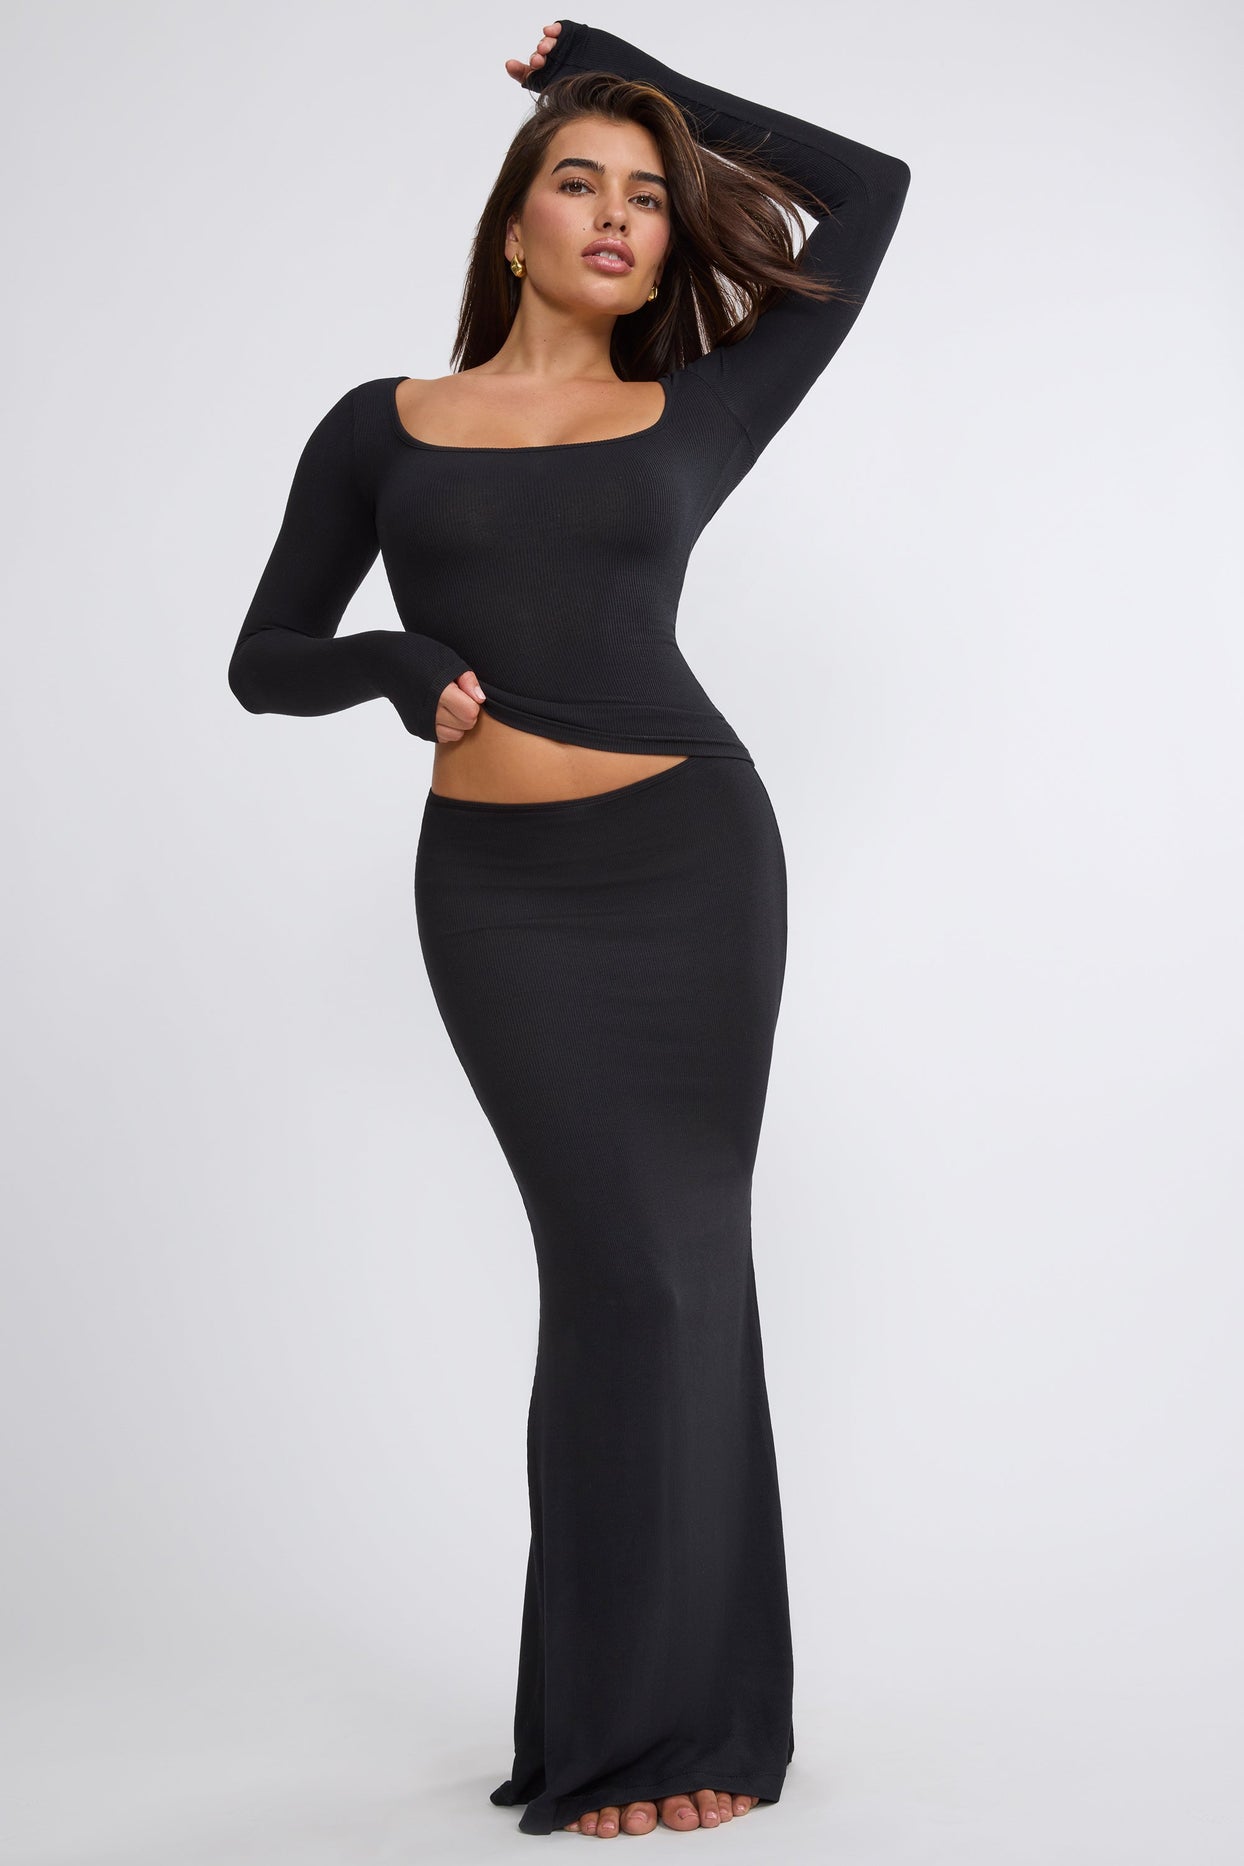 Ribbed Modal Square Neck Long Sleeve Top in Black